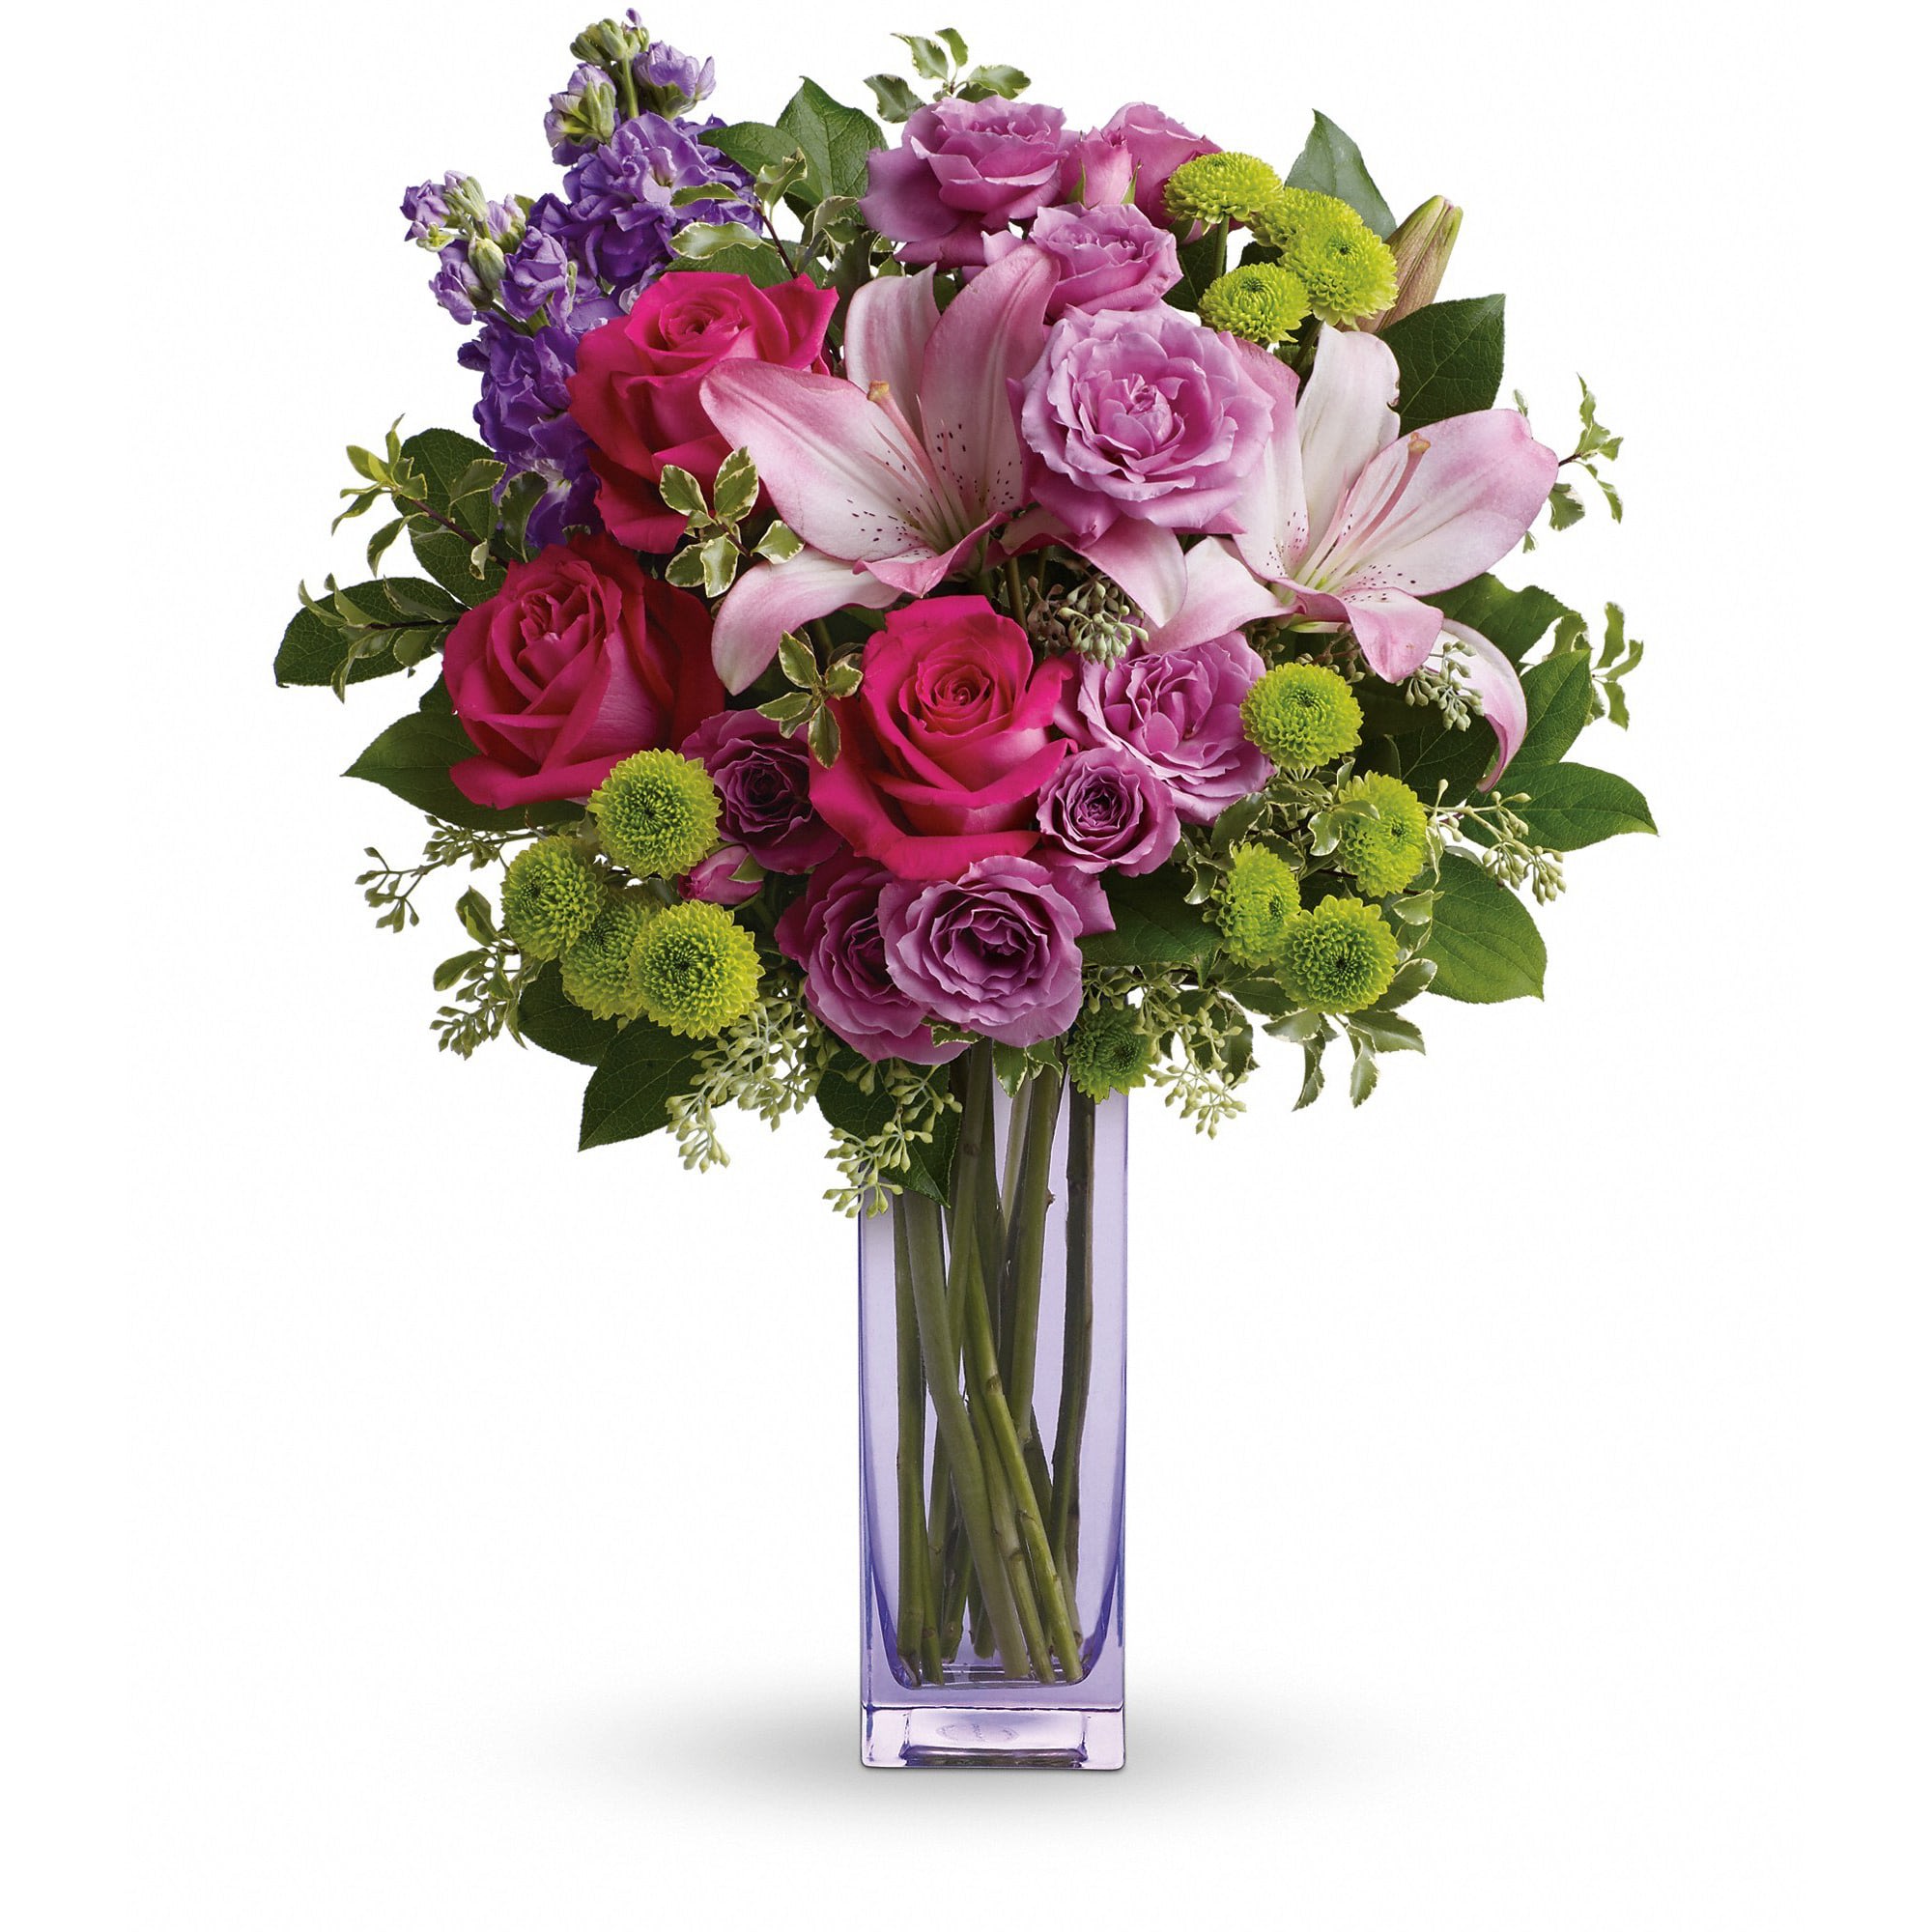 Fresh Flourish Bouquet - Color them happy with this bold, beautiful mix of hot pinks, flirty lavenders, and lime greens! Hand-delivered in a lavender glass vase, this posh present pampers your loved one on a special day - or any day at all! 